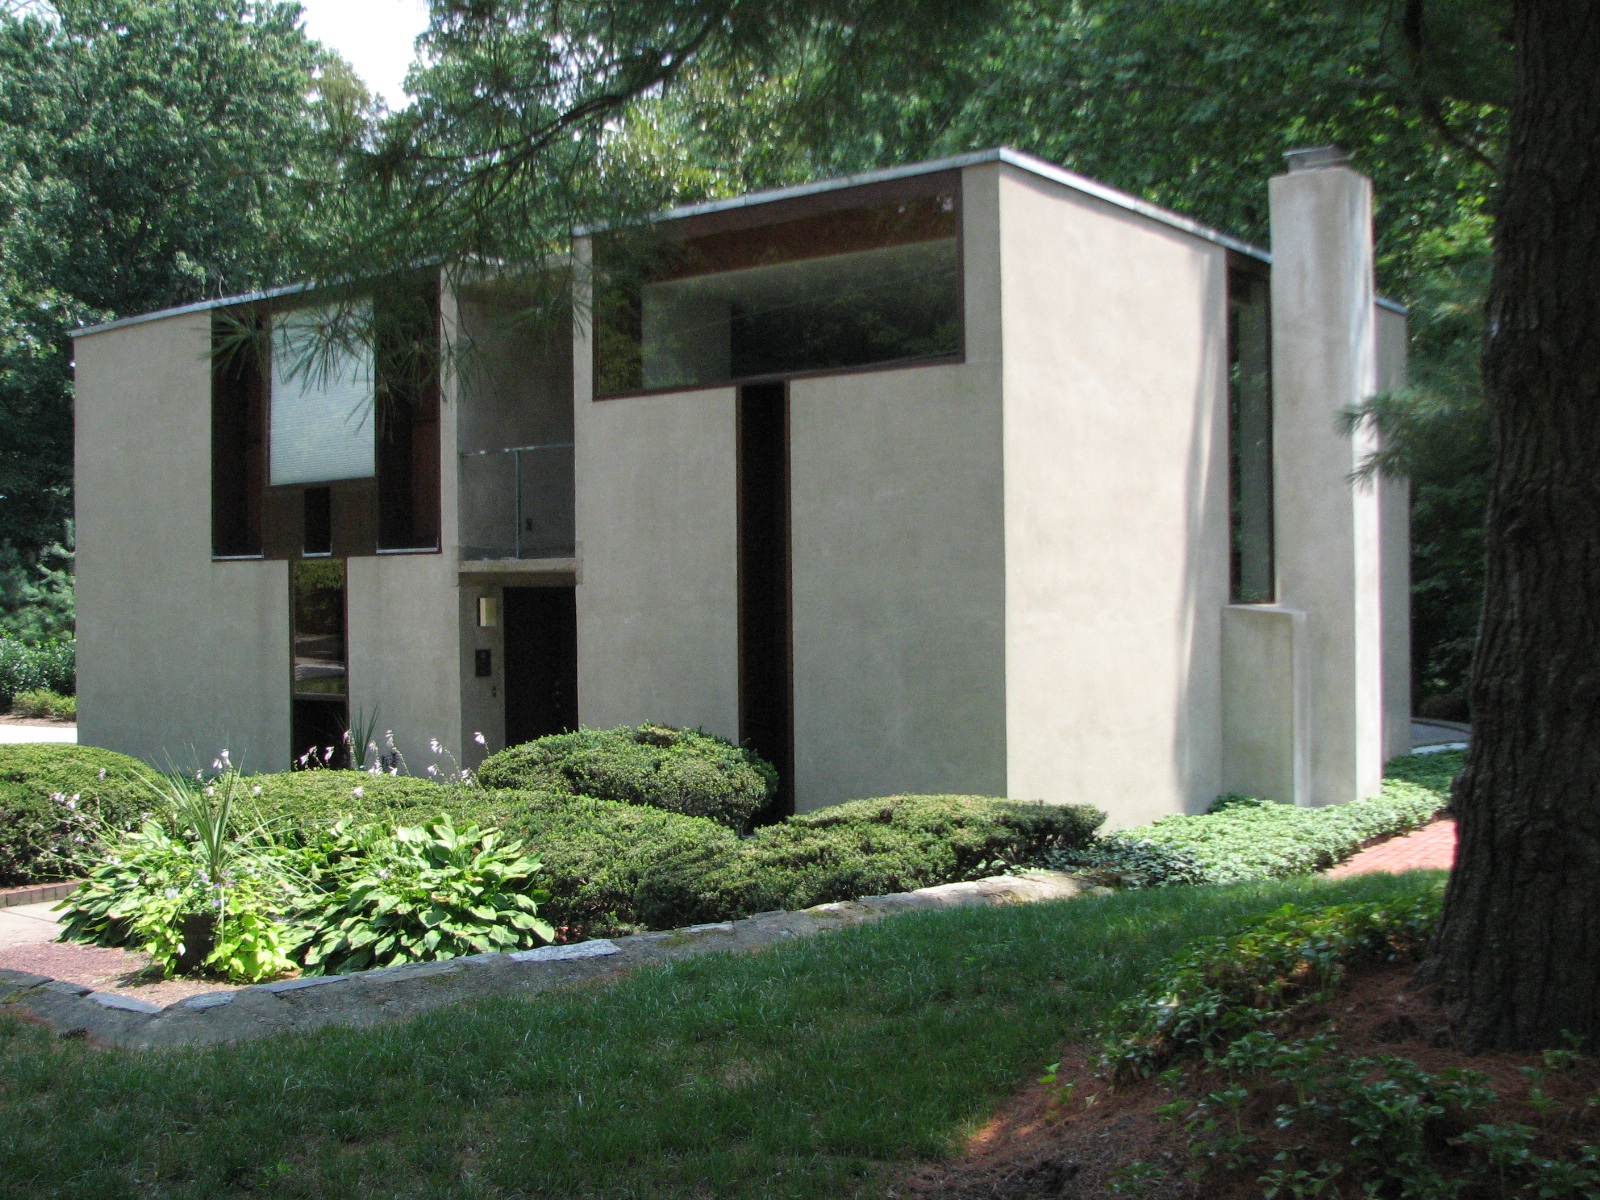 The front of the Margaret Esherick House allows light through two T-shaped windows.